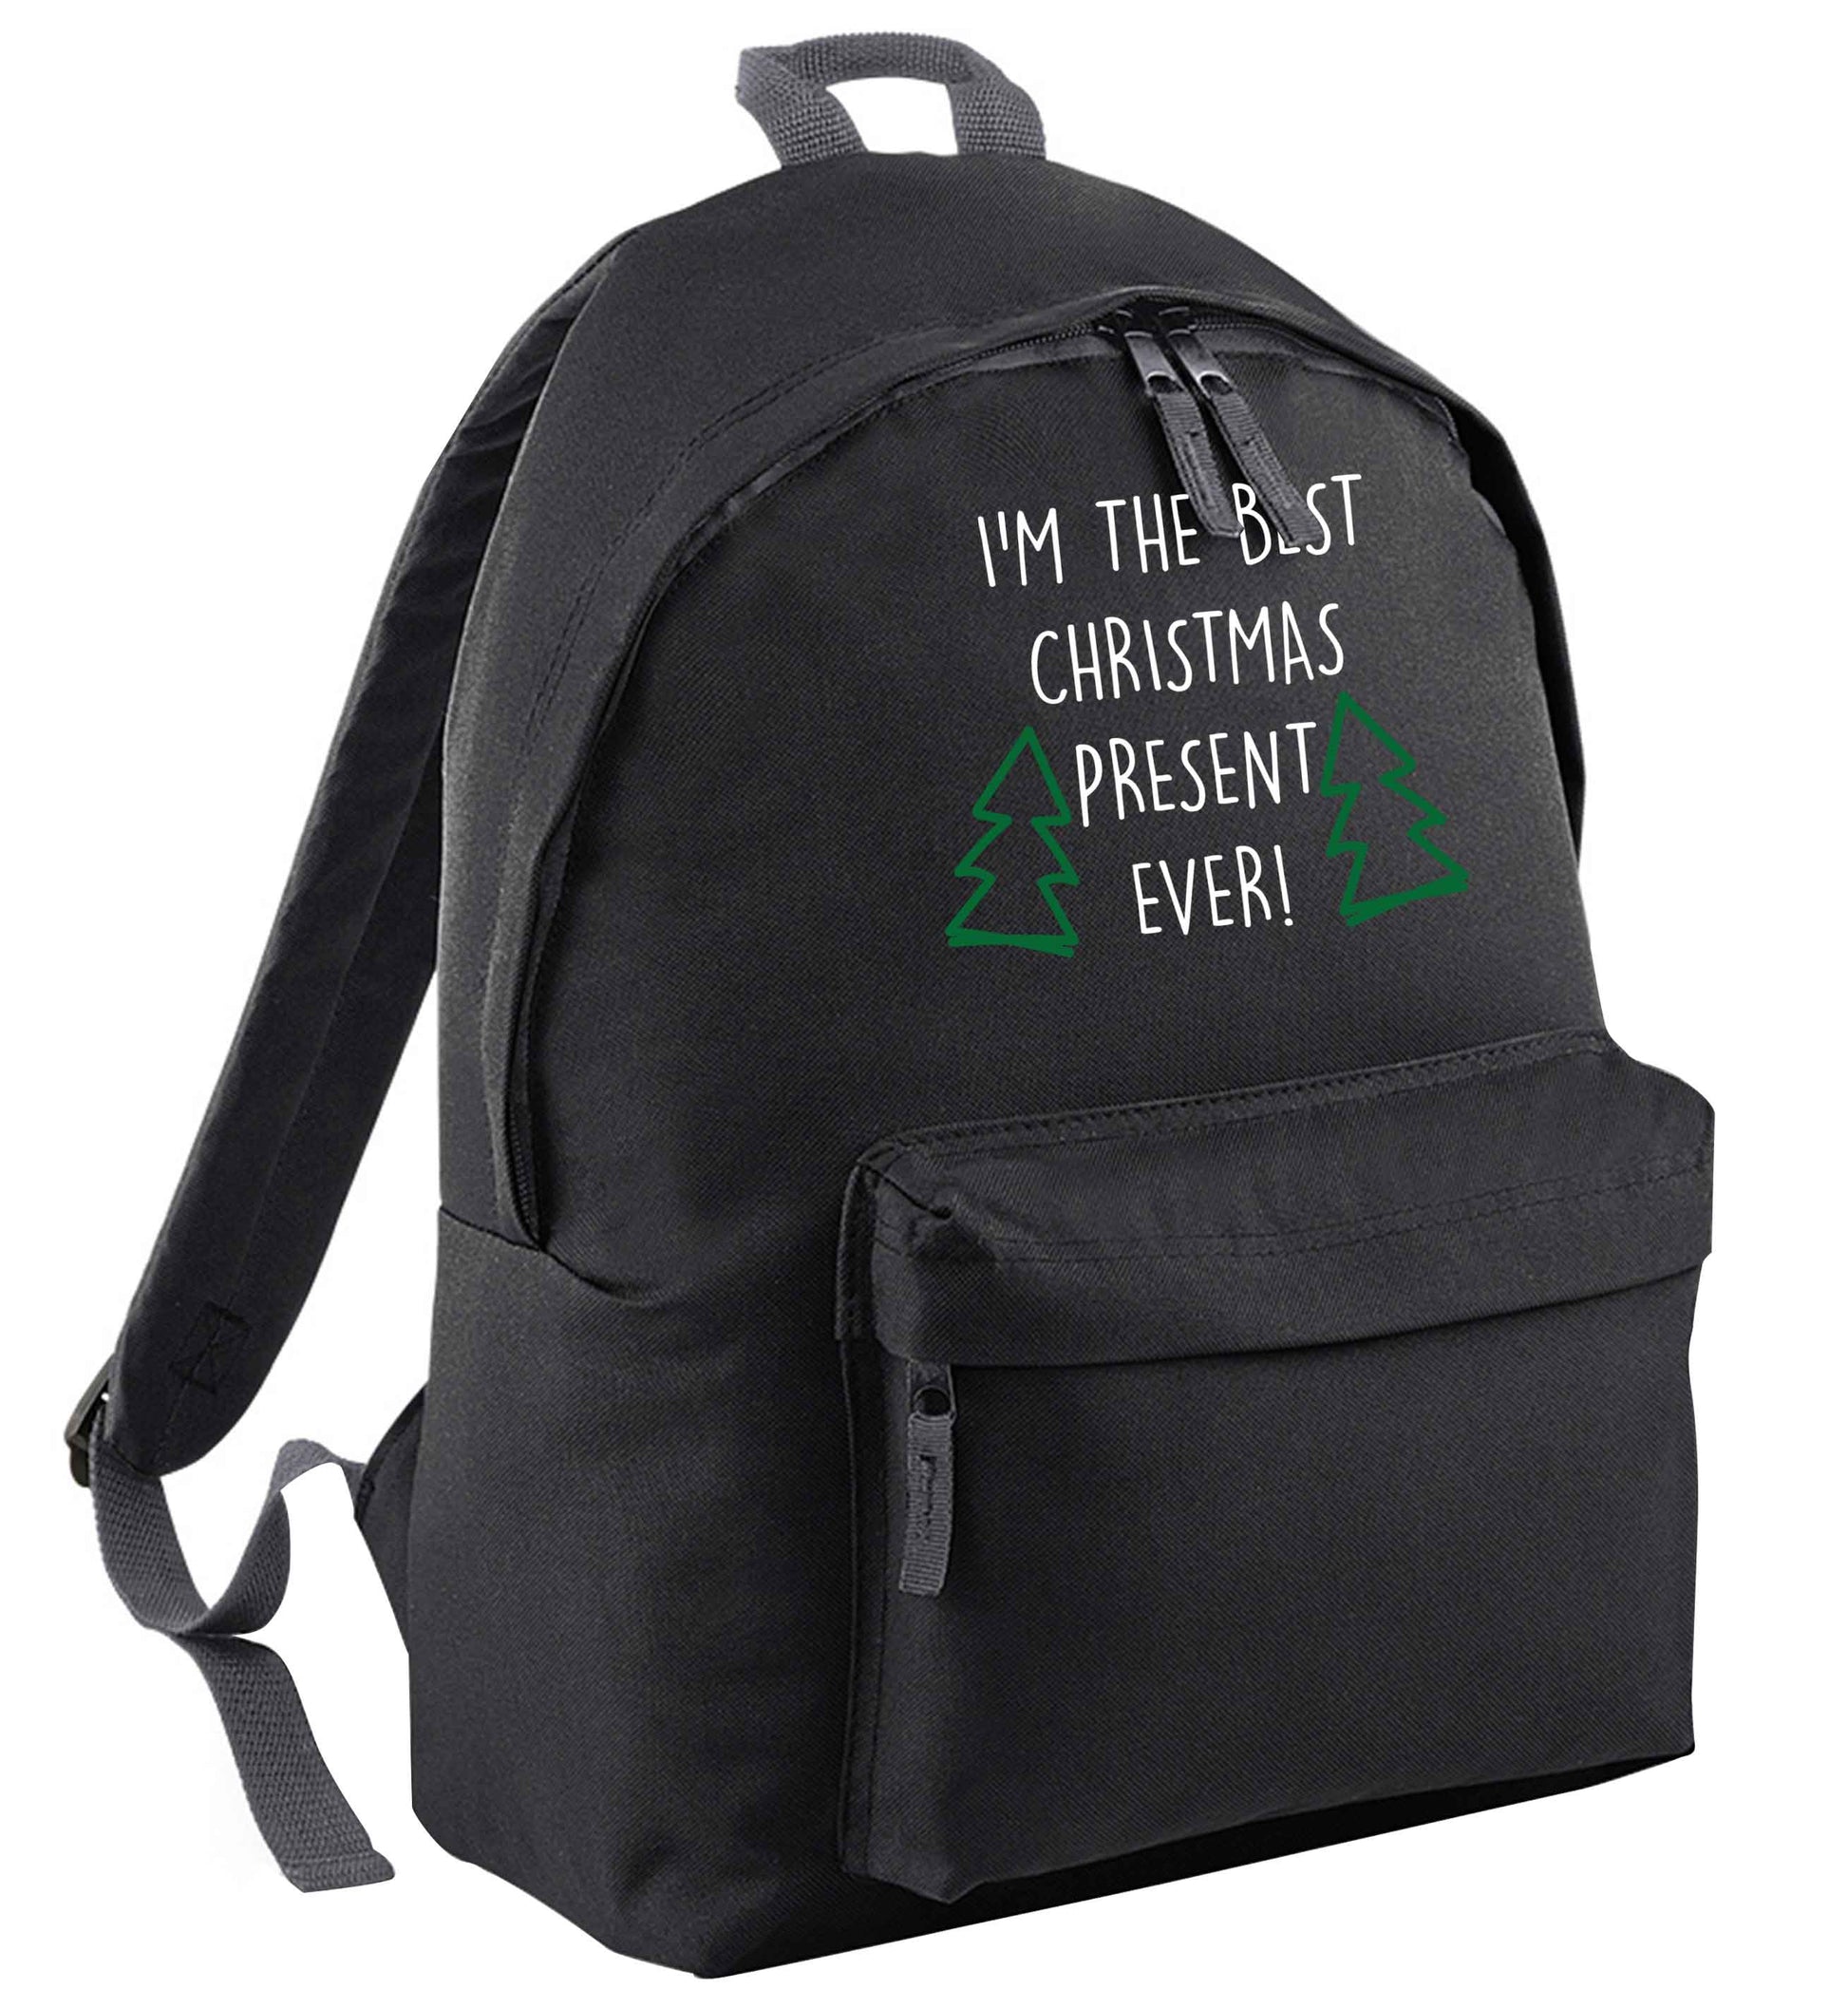 I'm the best Christmas present ever black adults backpack